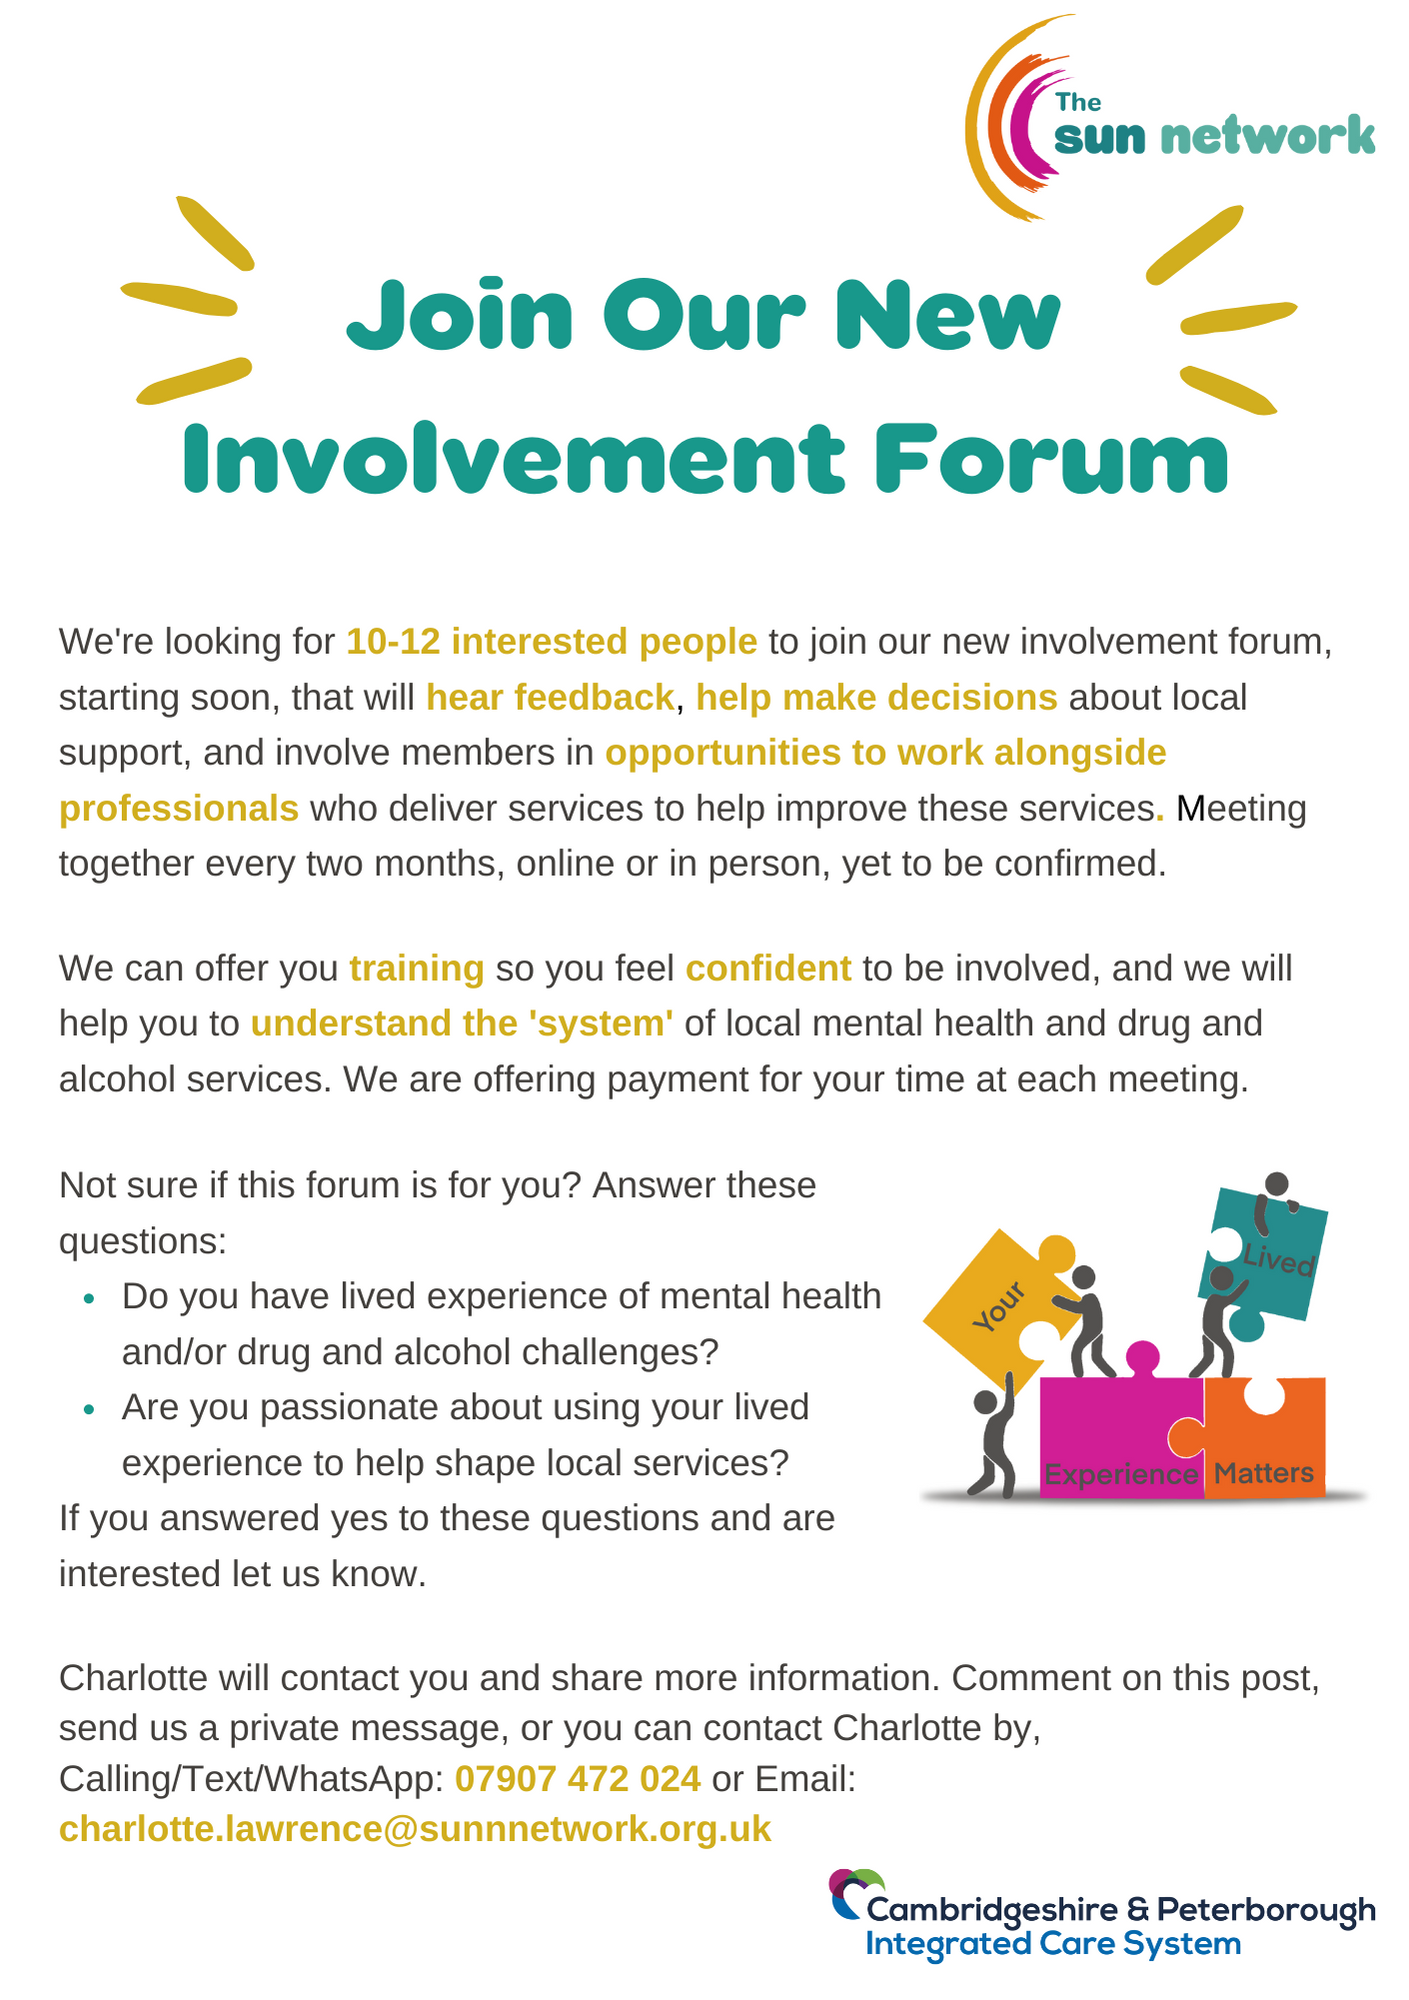 We're looking for 10-12 interested people to join our new involvement forum, starting soon, that will hear feedback, help make decisions about local support, and involve members in opportunities to work alongside professionals who deliver services to help improve these services. Meeting together every two months, online or in person, yet to be confirmed. 
We can offer you training so you feel confident to be involved, and we will help you to understand the 'system' of local mental health and drug and alcohol services. We are offering payment for your time at each meeting. 
Not sure if this forum is for you? Answer these questions: 
Do you have lived experience of mental health and/or drug and alcohol challenges? 
Are you passionate about using your lived experience to help shape local services?
If you answered yes to these questions and are interested let us know. 
Charlotte will contact you and share more information. Comment on this post, send us a private message, or you can contact Charlotte by, Calling/Text/WhatsApp: 07907 472 024 or Email: charlotte.lawrence@sunnnetwork.org.uk 